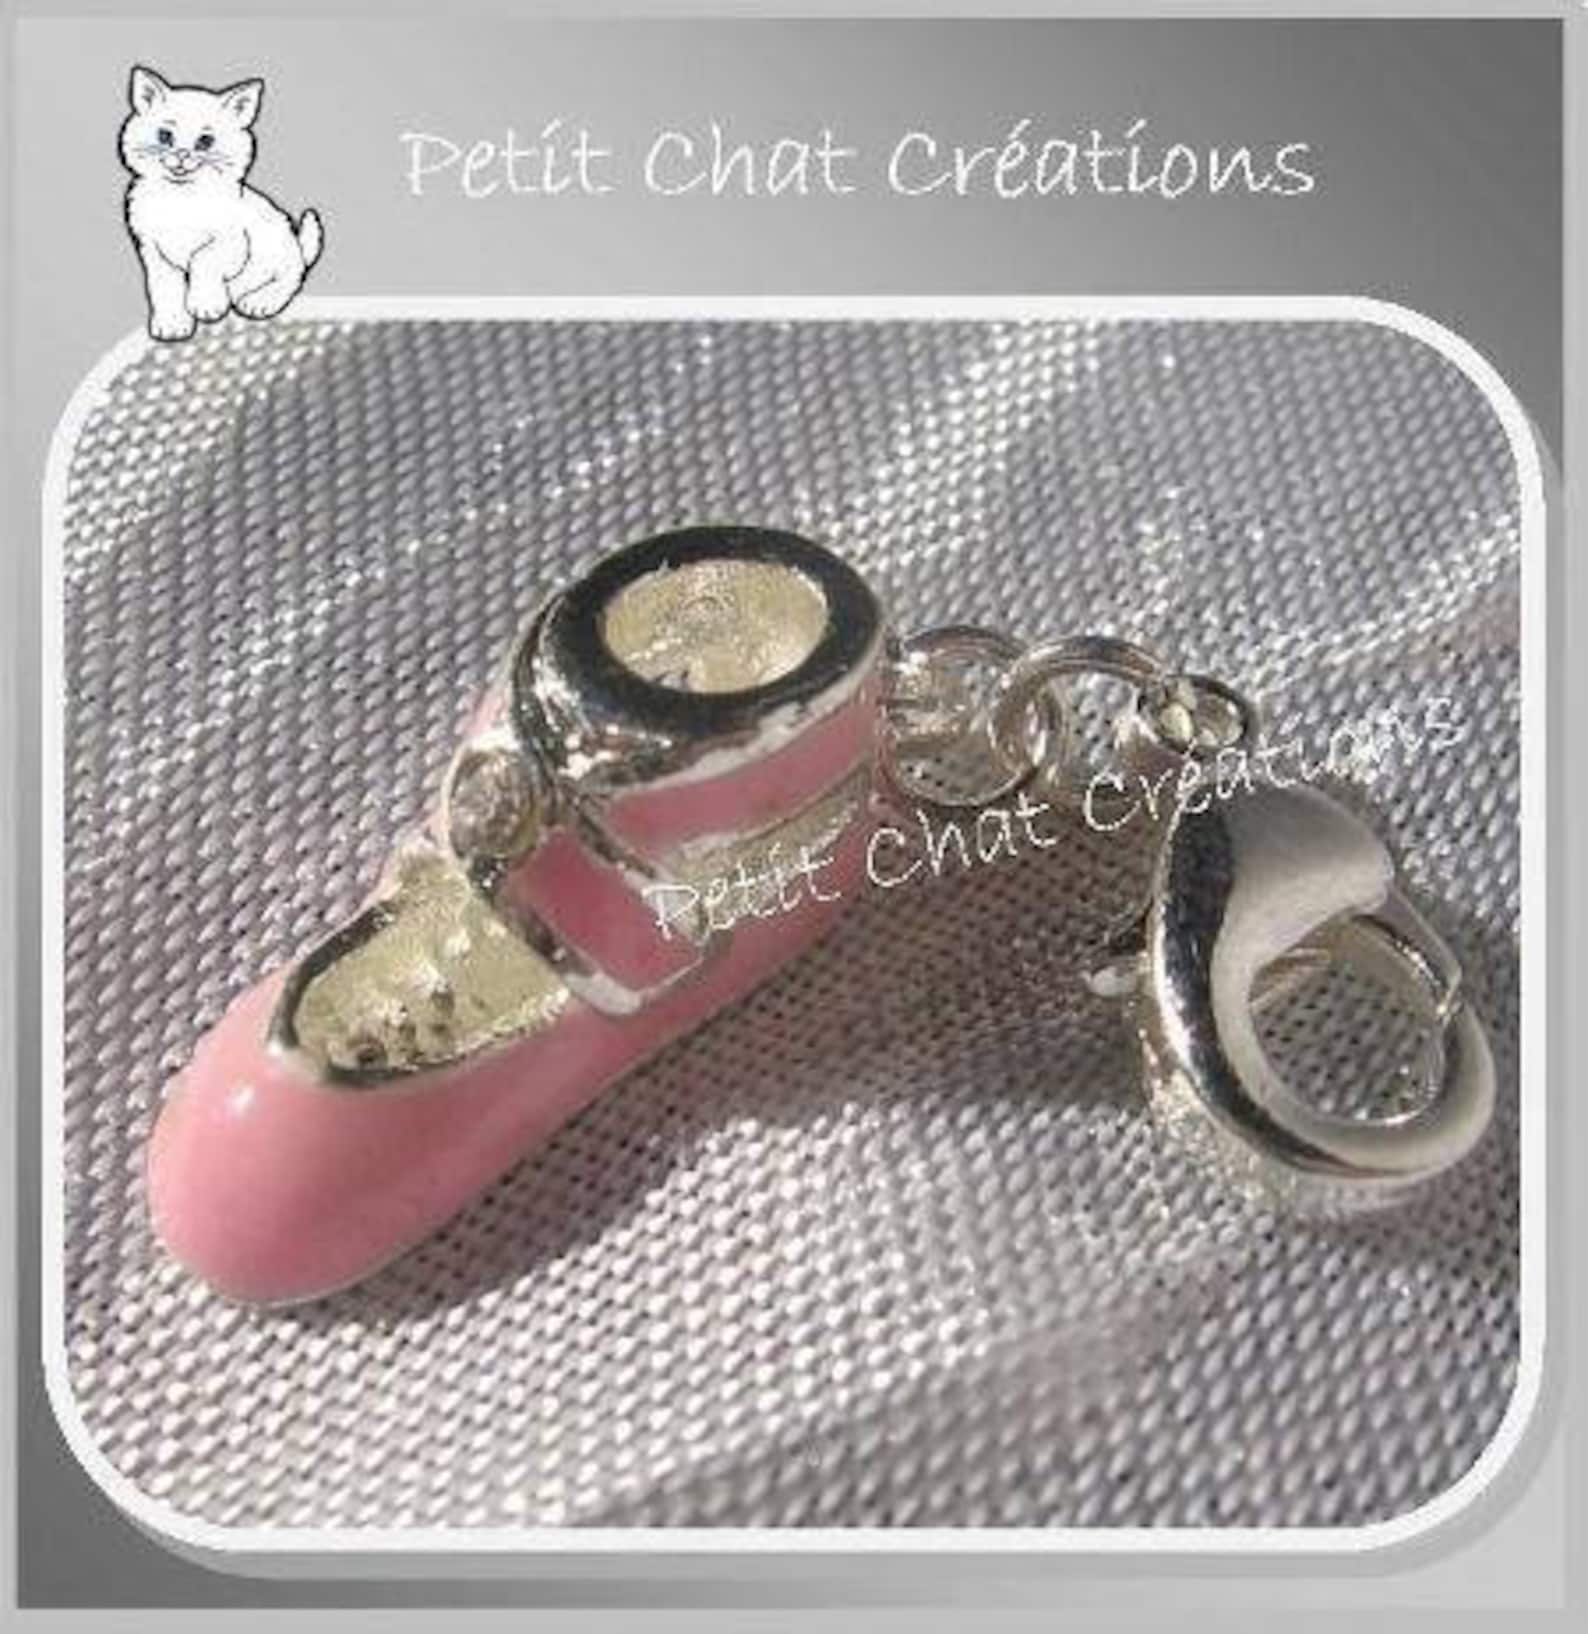 1 charm silver charm on lobster pink ballet shoe in 3d * v258a